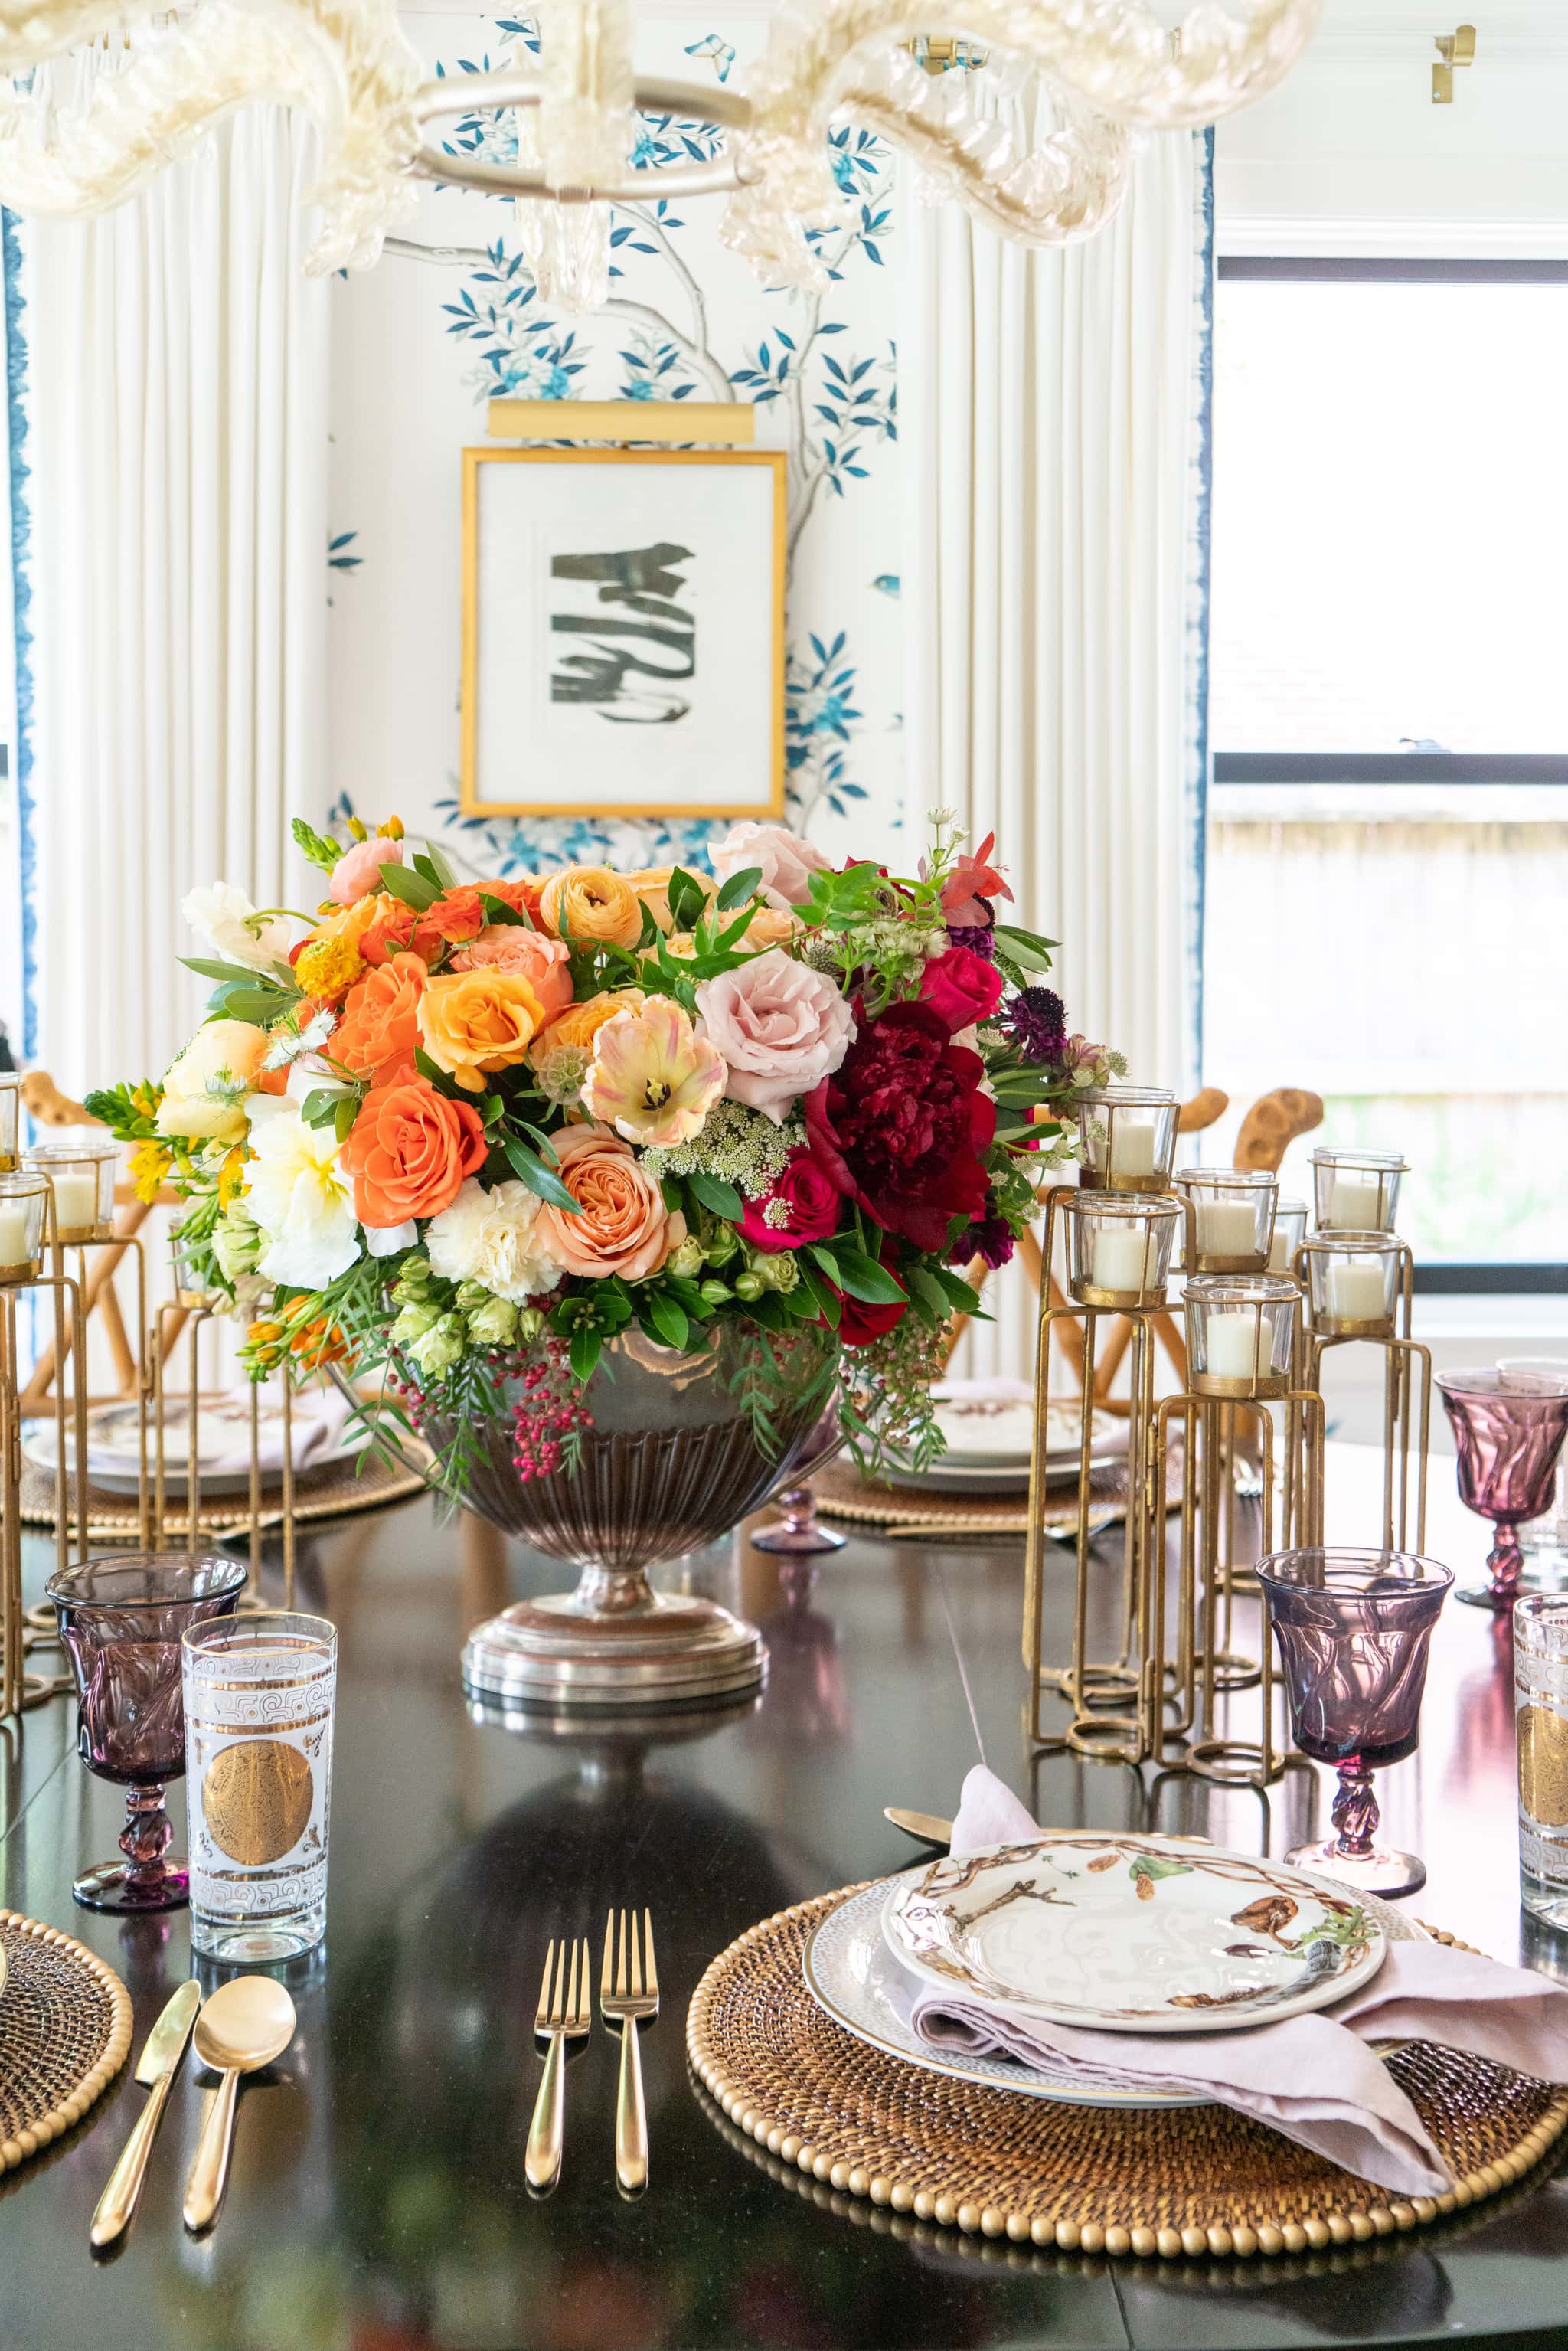 A lovely bouquet of roses, peonies, and greenery at the home of Laura Umansky